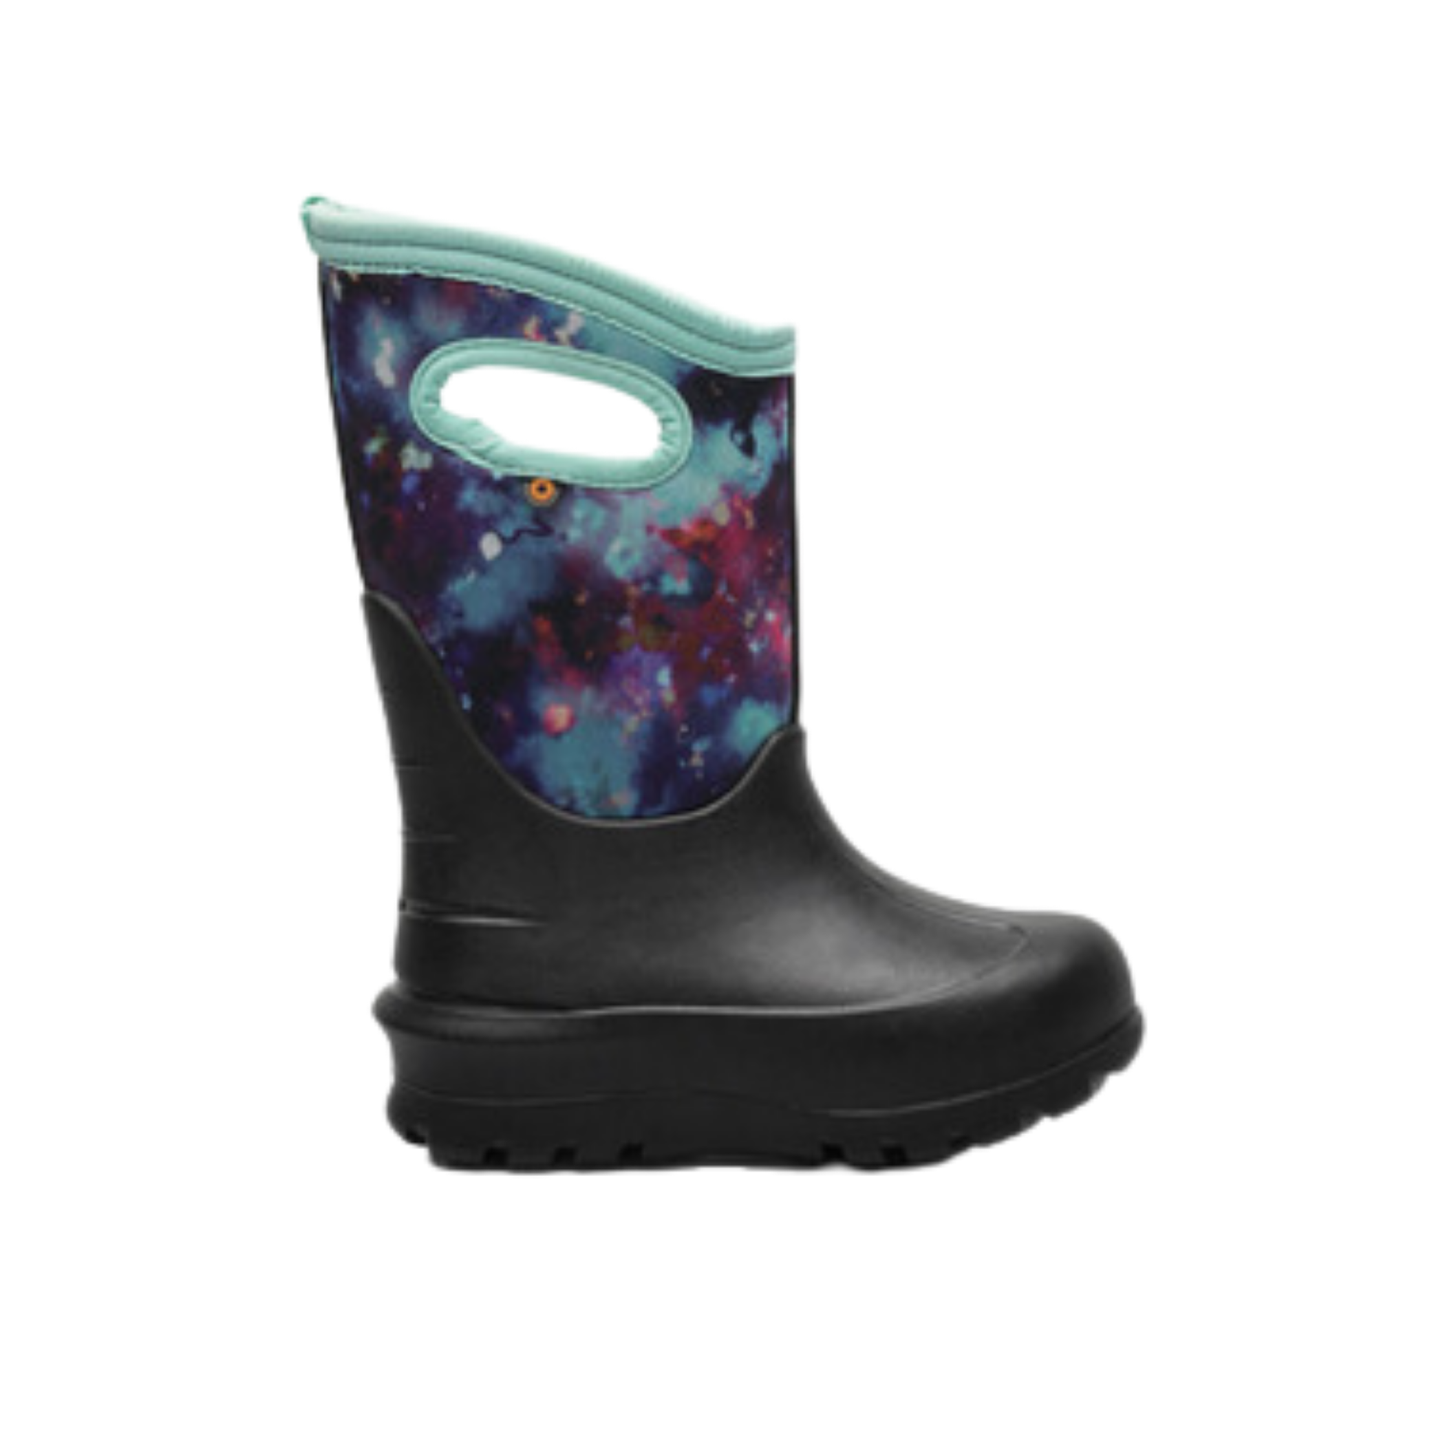 Bogs Neo Classic Sparkle Space